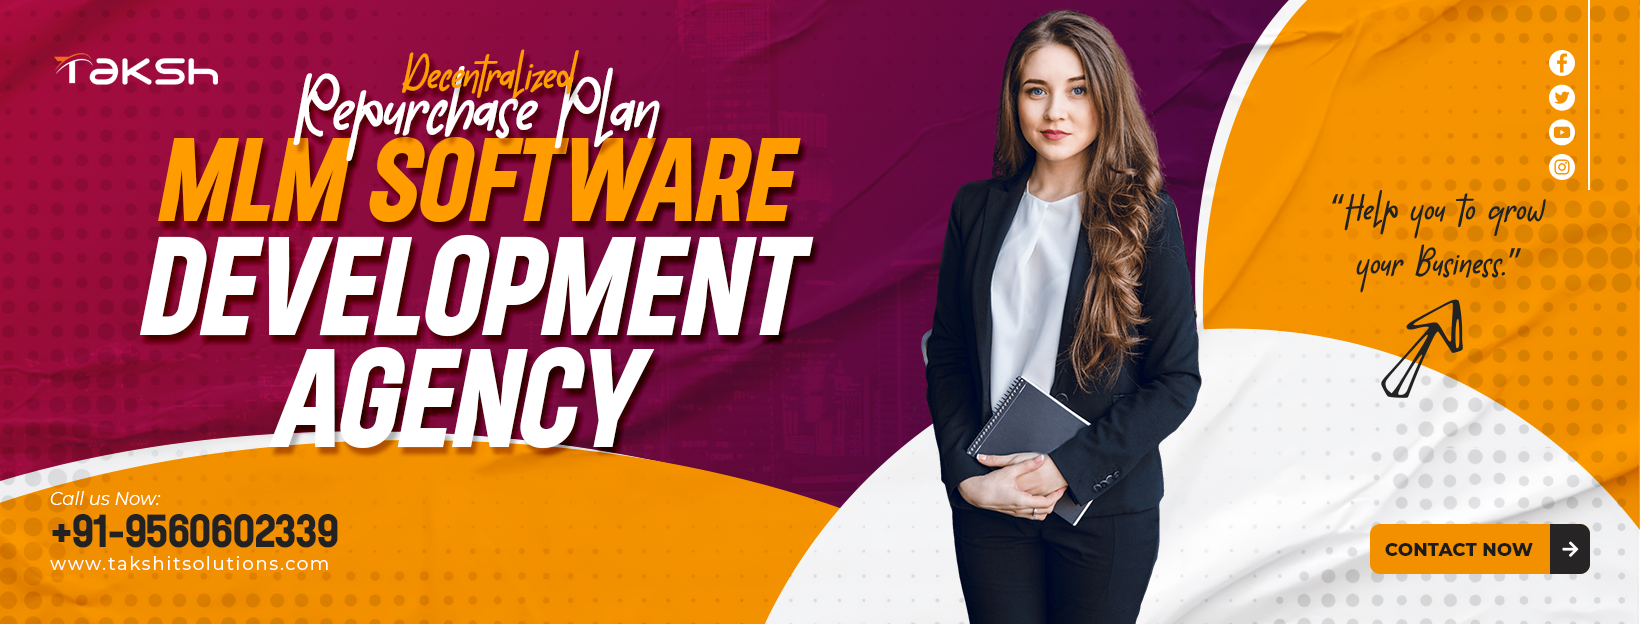 Decentralized Repurchase Plan MLM Software Development Agency || Taksh IT Solutions Private Limited